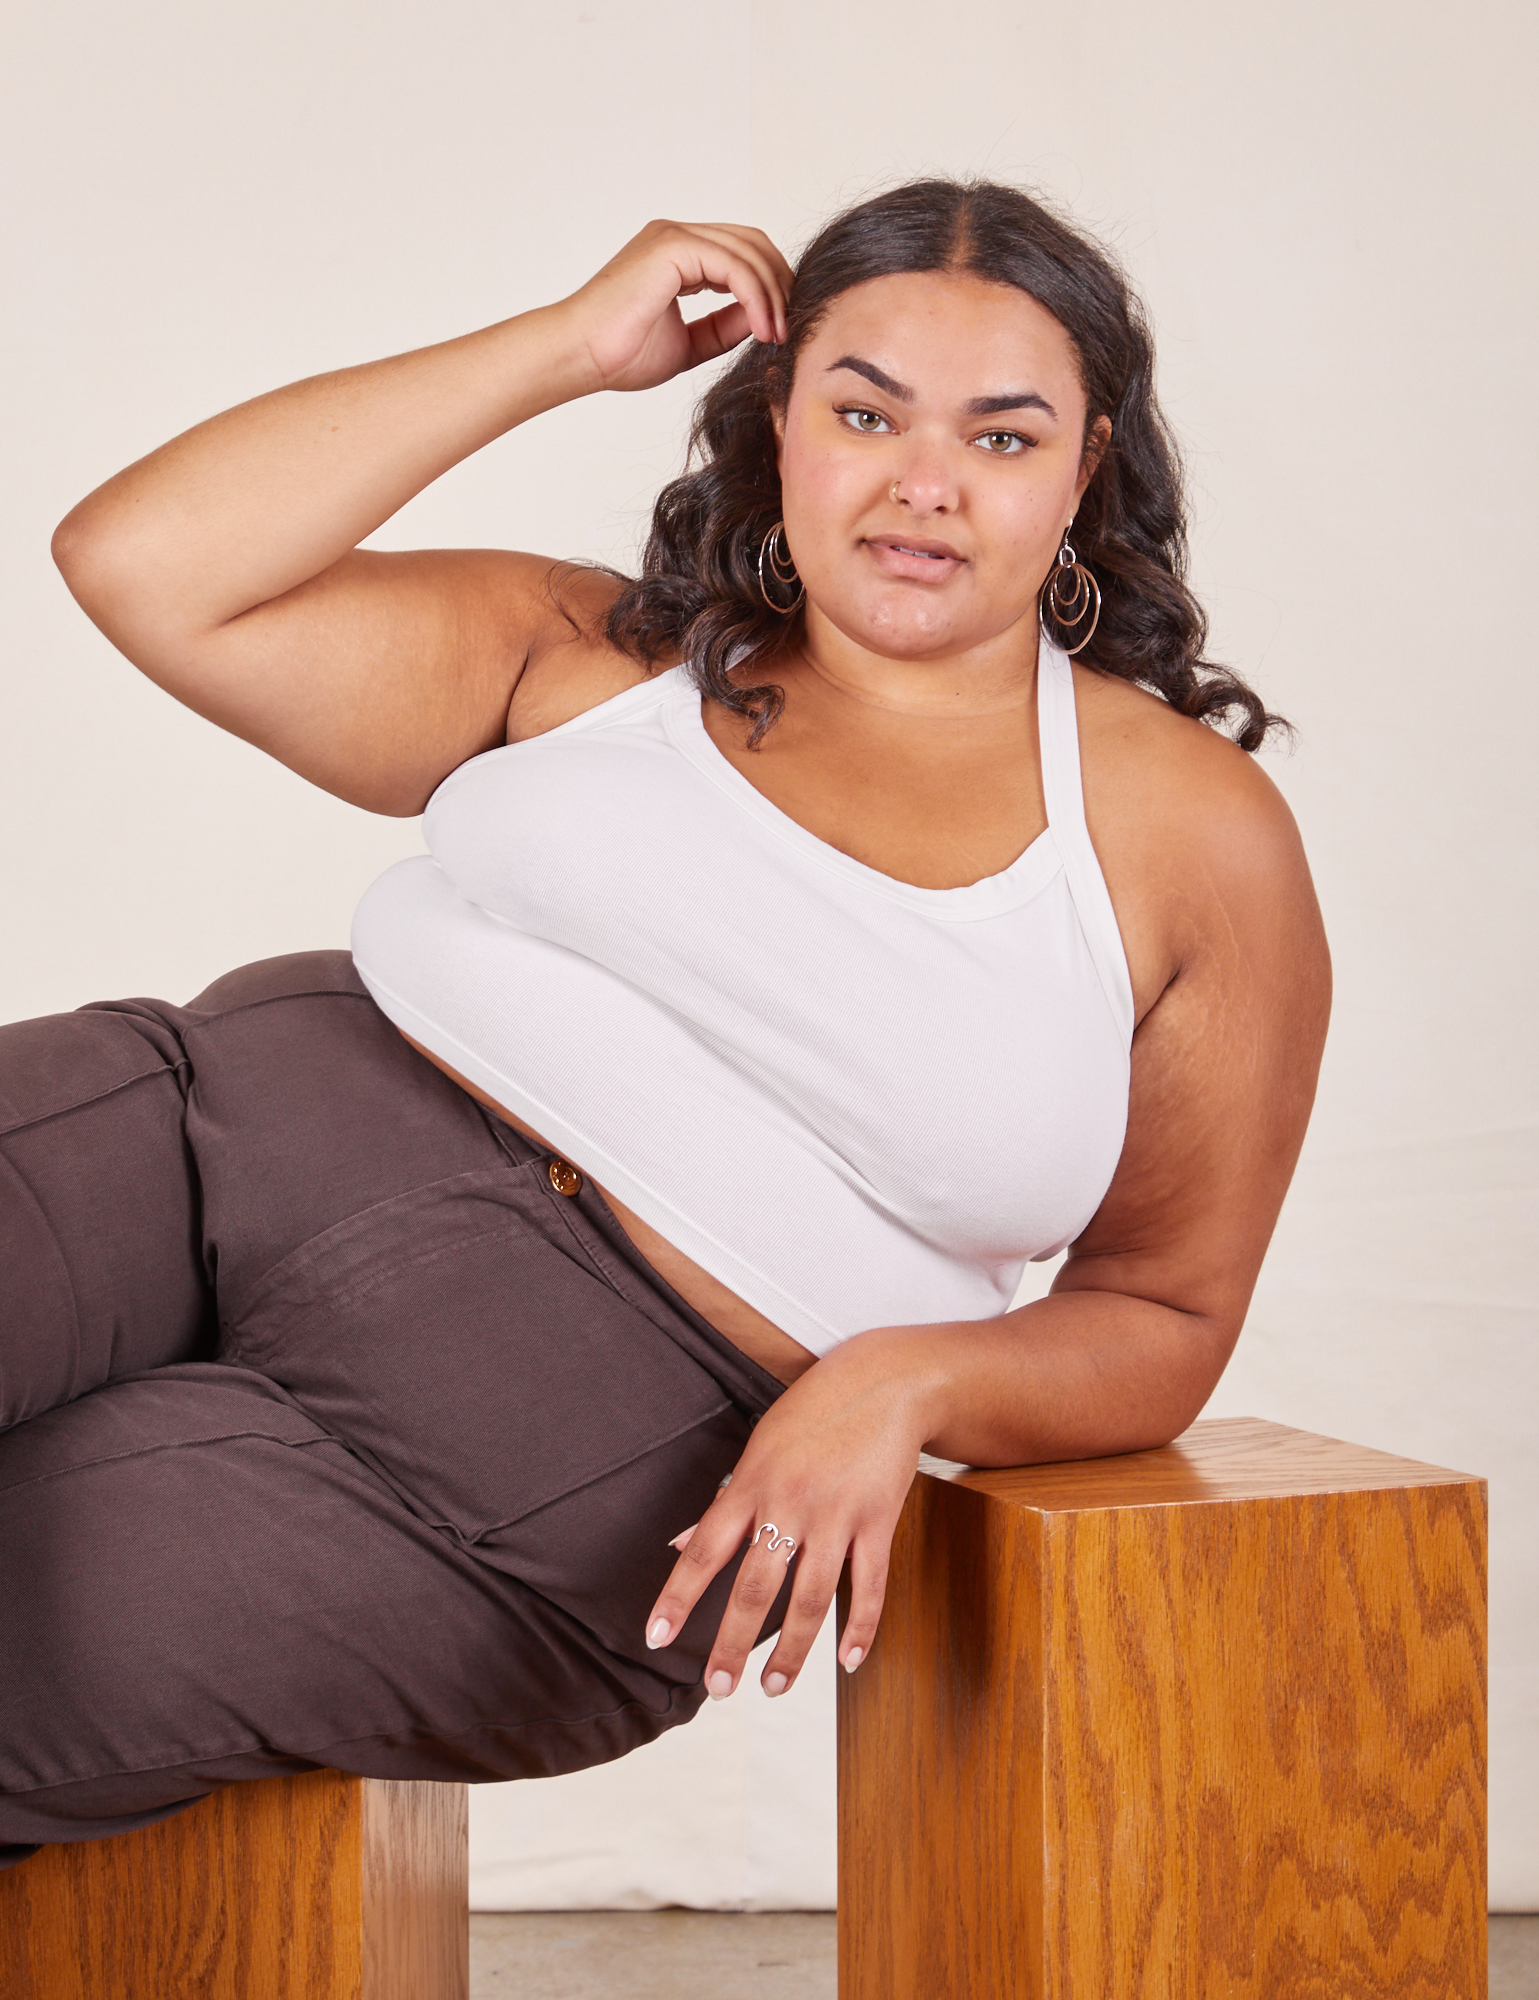 Alicia is 5'9" and wearing XL Halter Top in Vintage Tee Off-White paired with espresso brown Western Pants. She is sitting sideways on a wooden box and her right elbow is leaning on another wooden box.